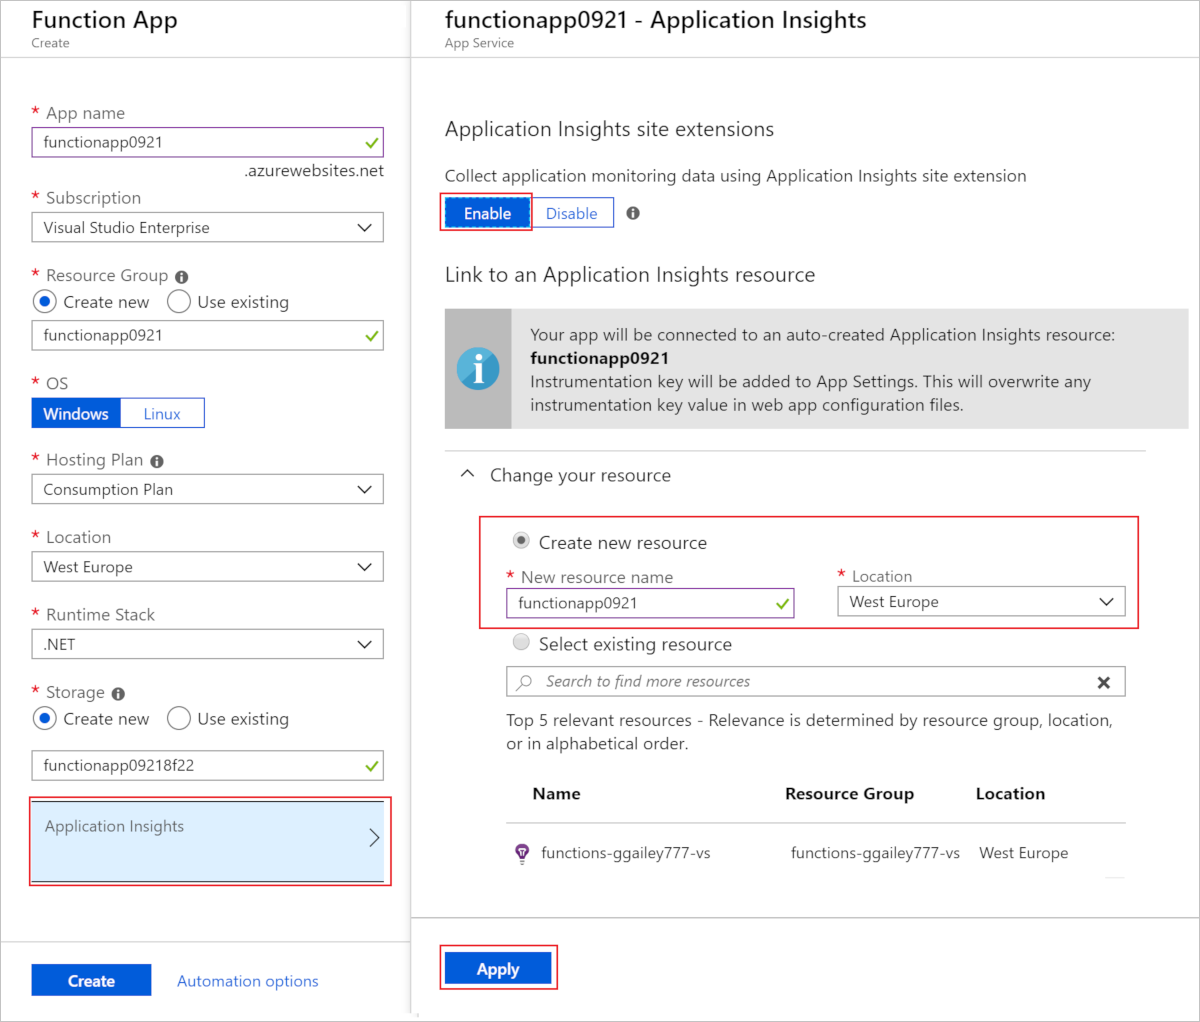 Screenshot of enabling Application Insights while creating a function app.